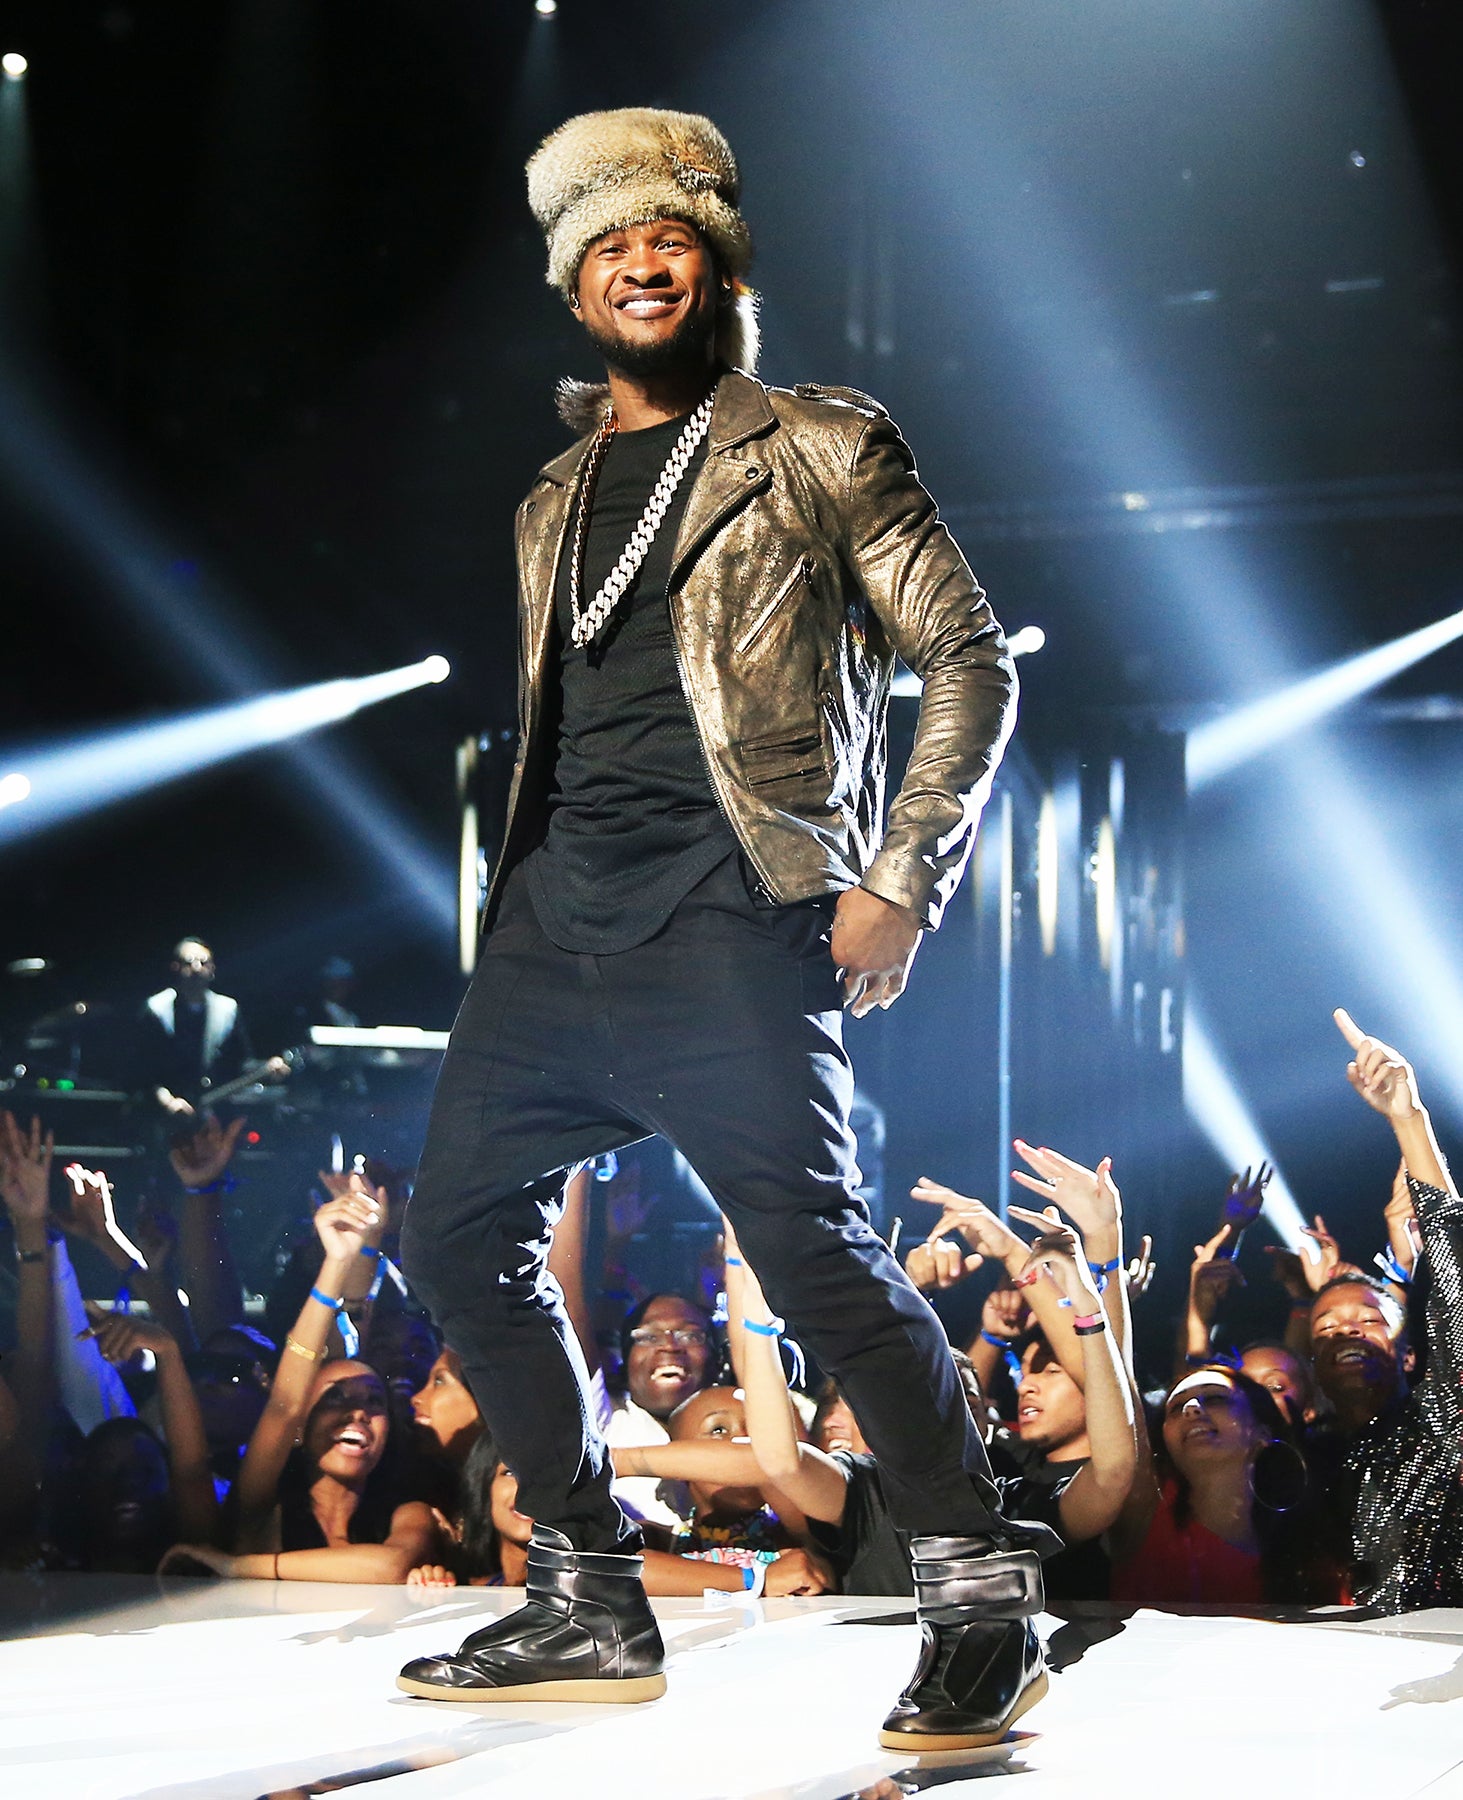 Usher to Perform New Music at 2014 MTV Music Awards
